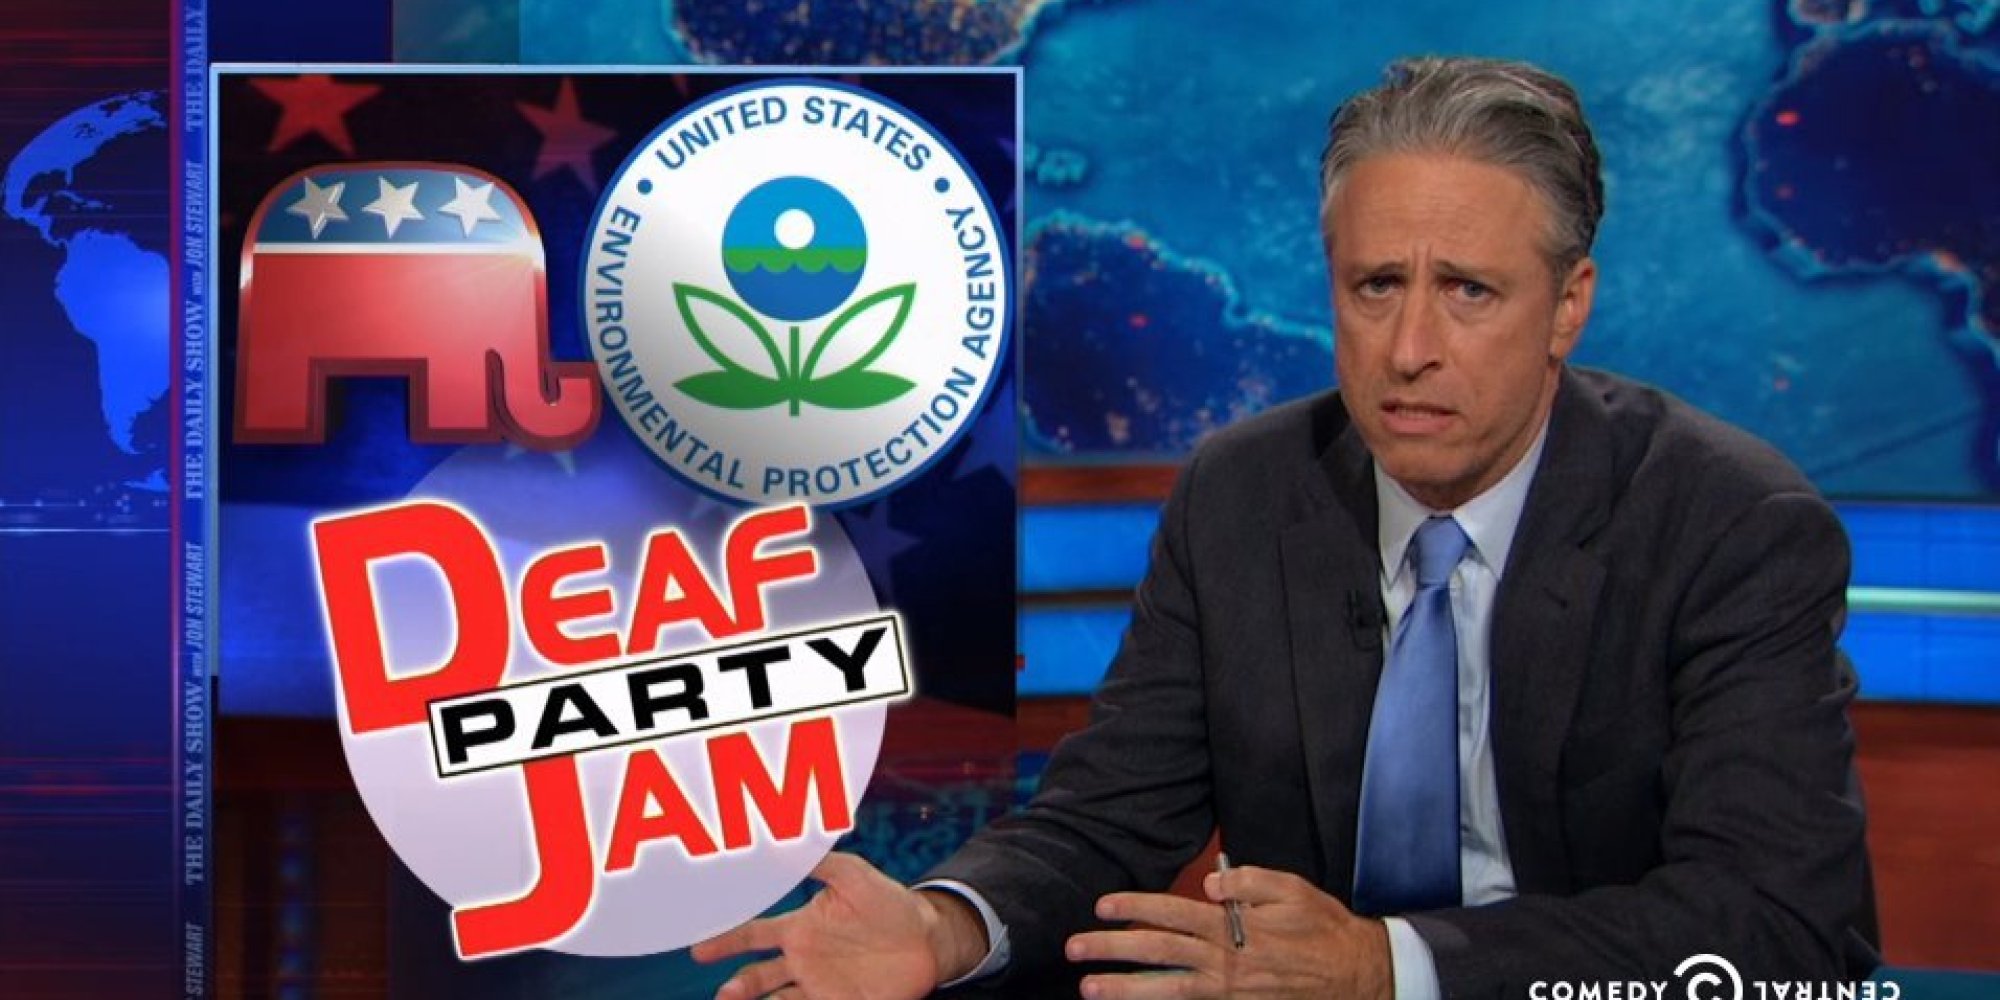 Jon Stewart Knocks Republicans For Being Willfully Blind On Climate